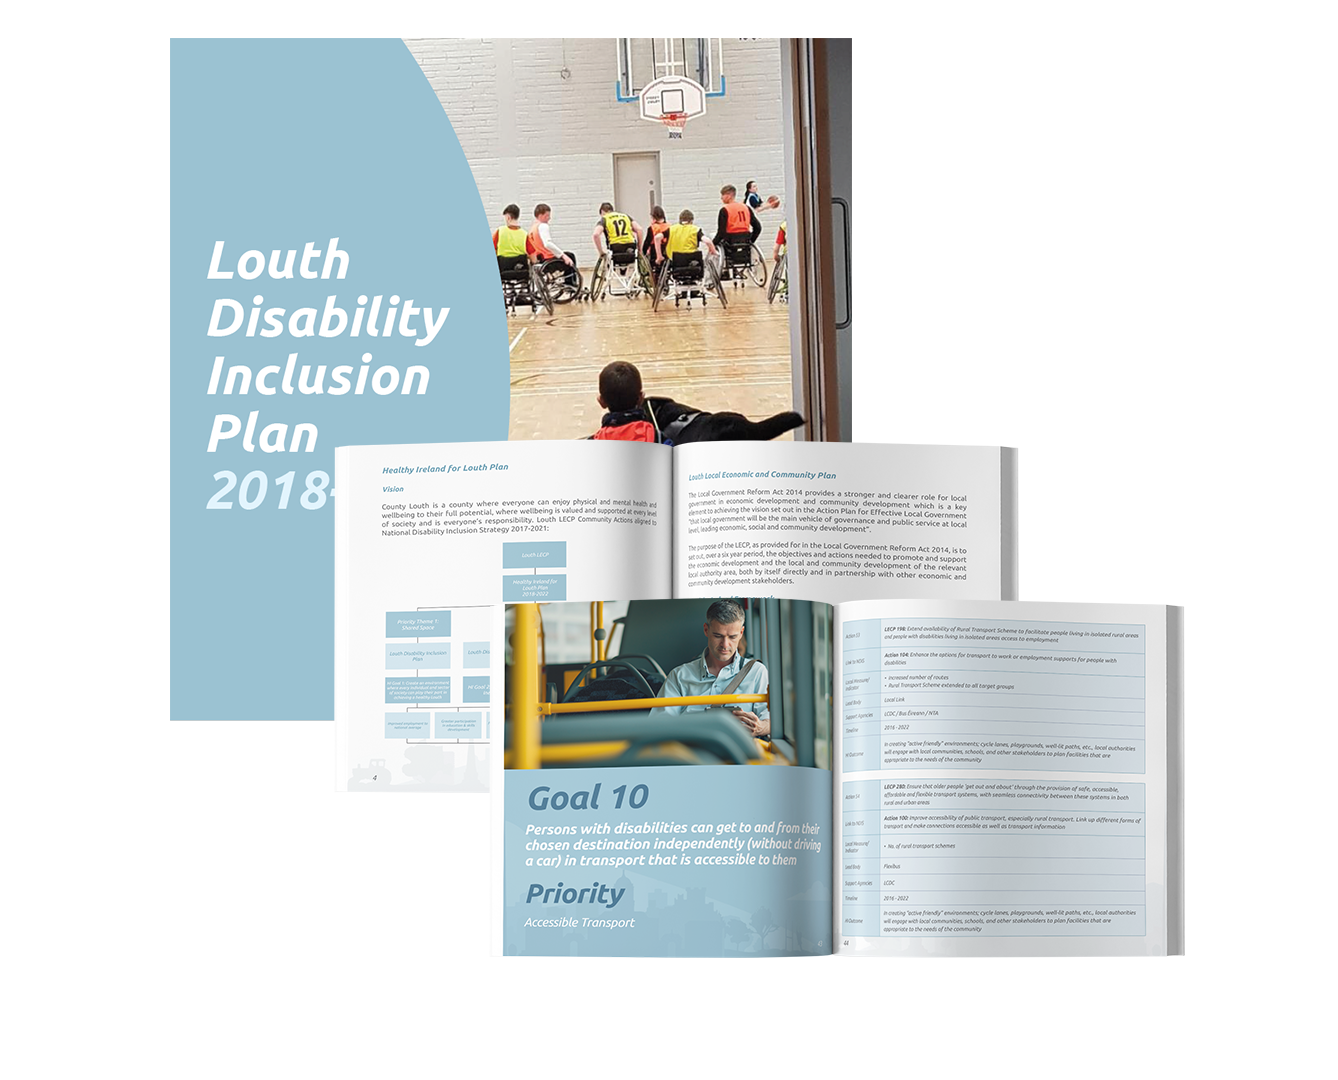 Creative Solutions for Government Publications - Louth Disability Inclusion Plan Brochure Mockup - Graphic Design by The Digital Bakery Creative Agency in Dundalk Louth